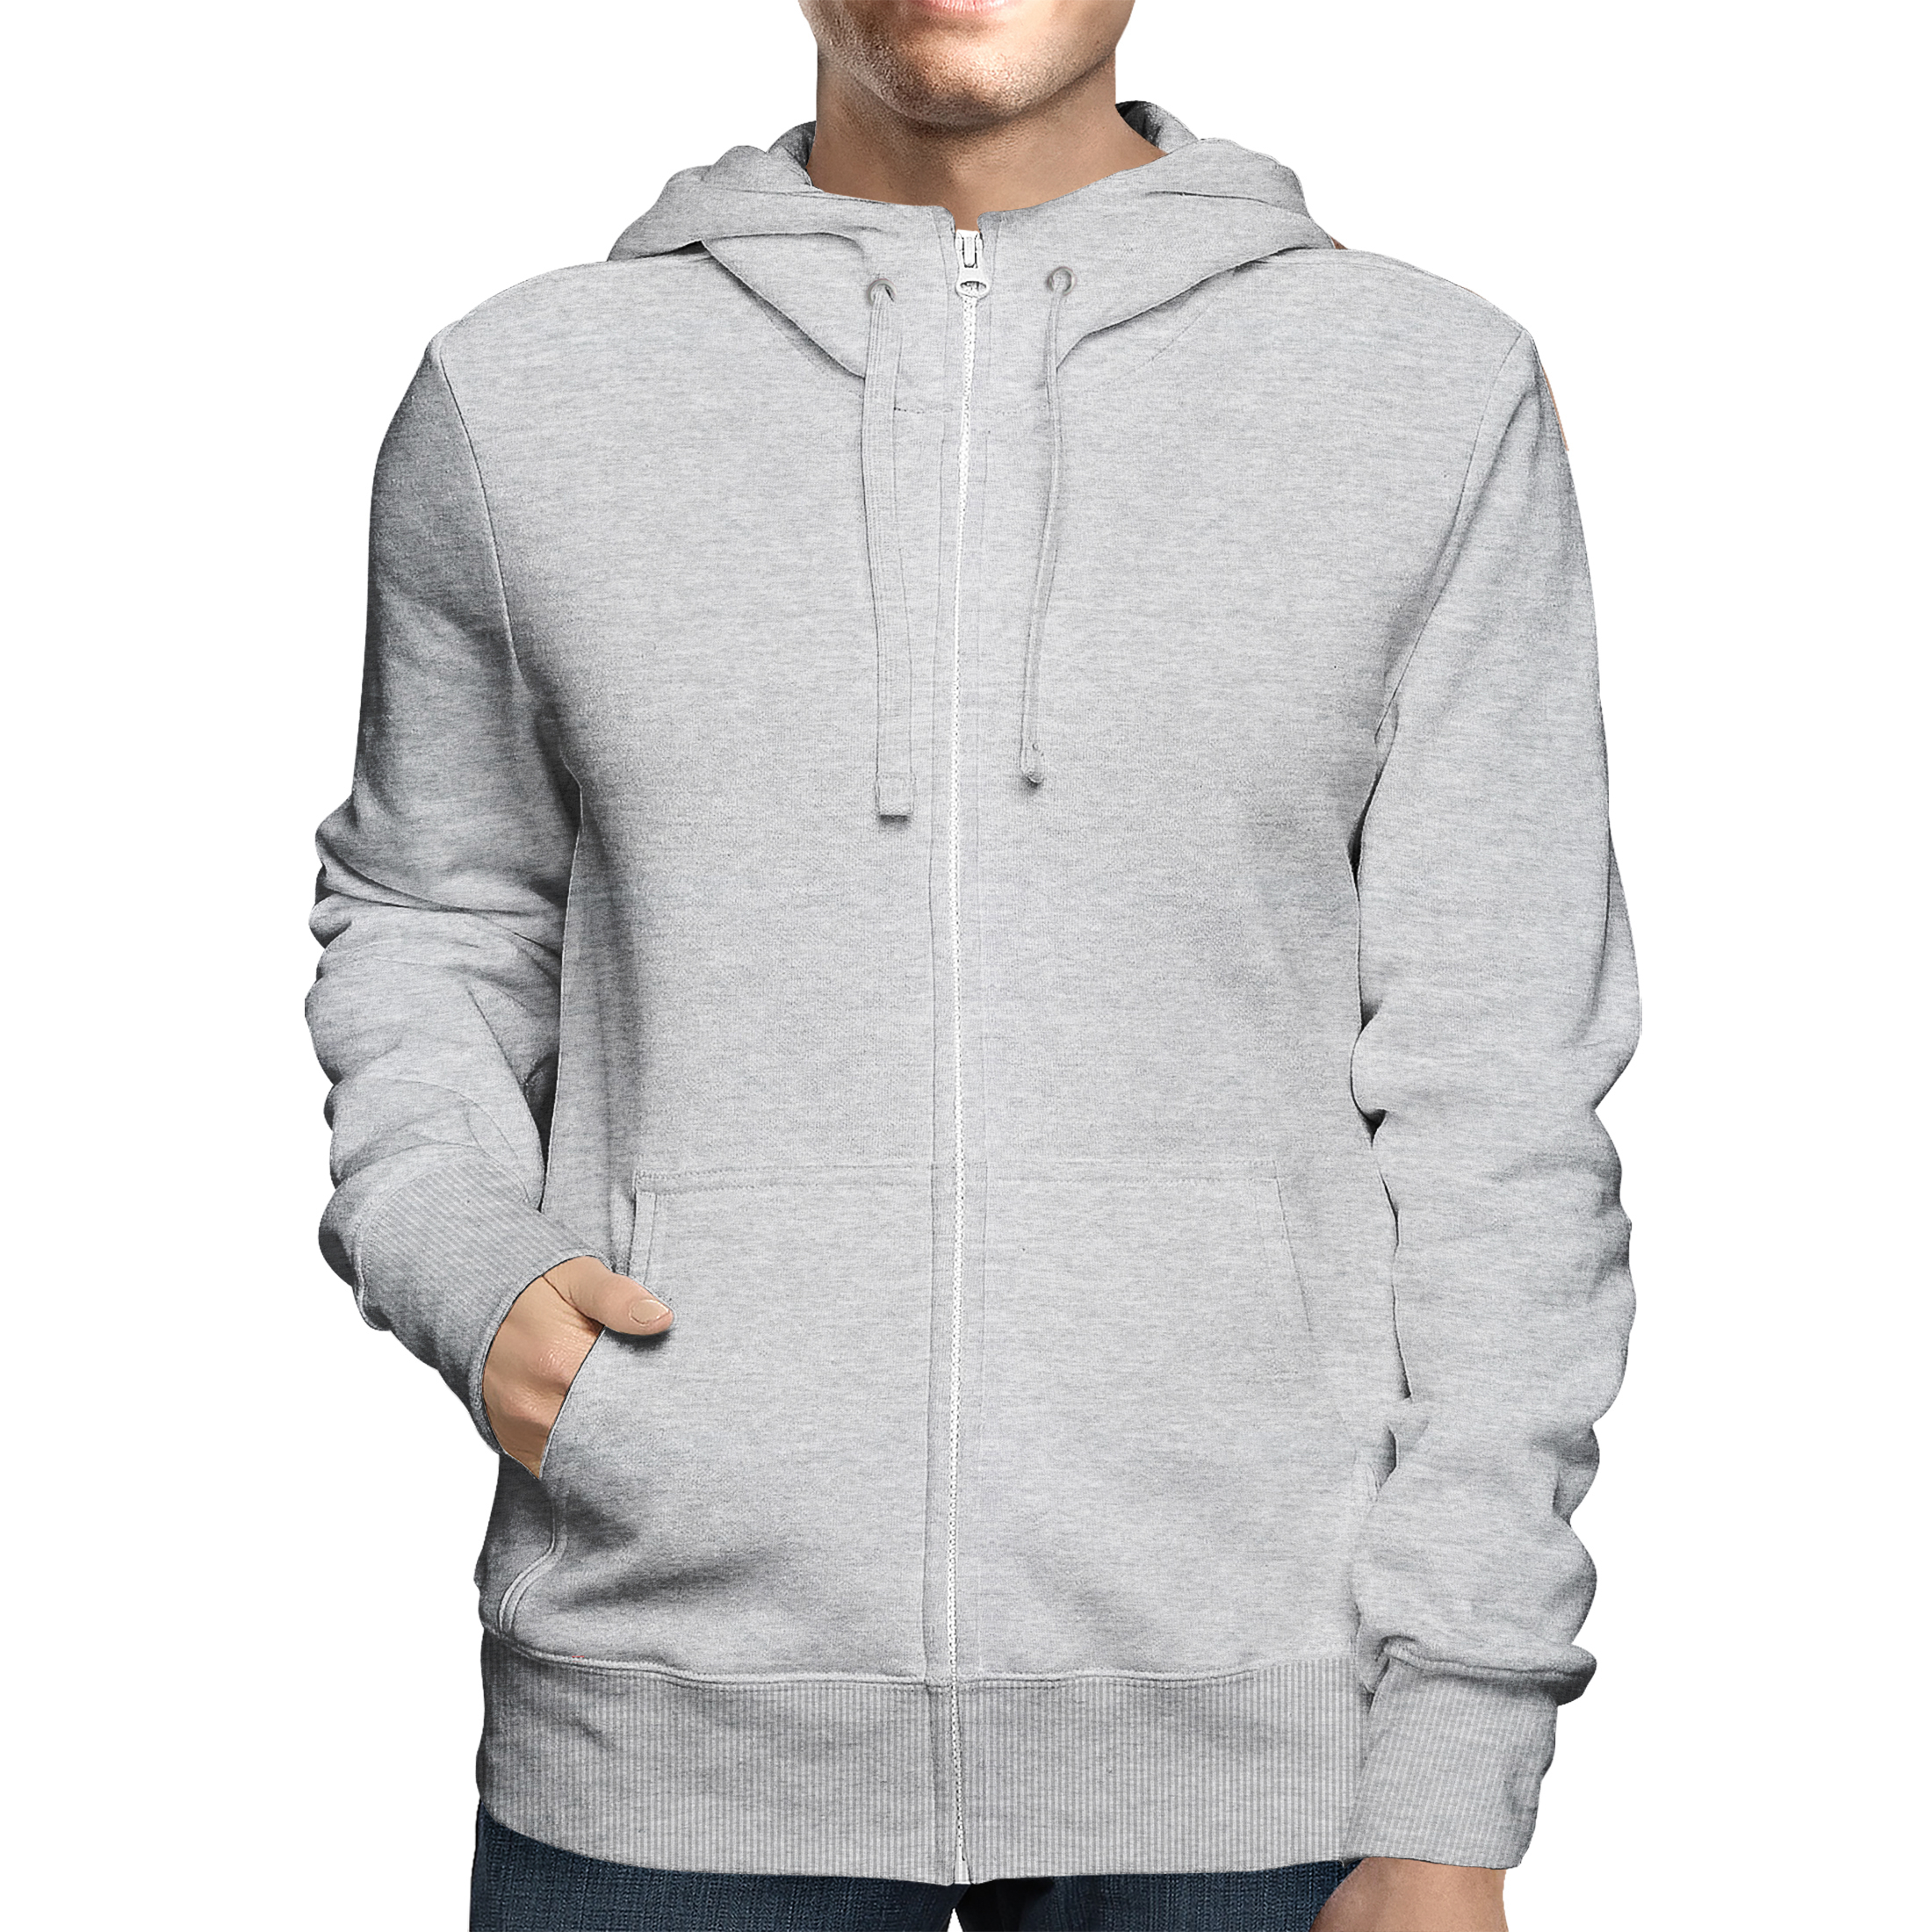 2-Pack: Men's Full Zip Up Fleece-Lined Hoodie Sweatshirt (Big & Tall Size Available) - Gray, Large